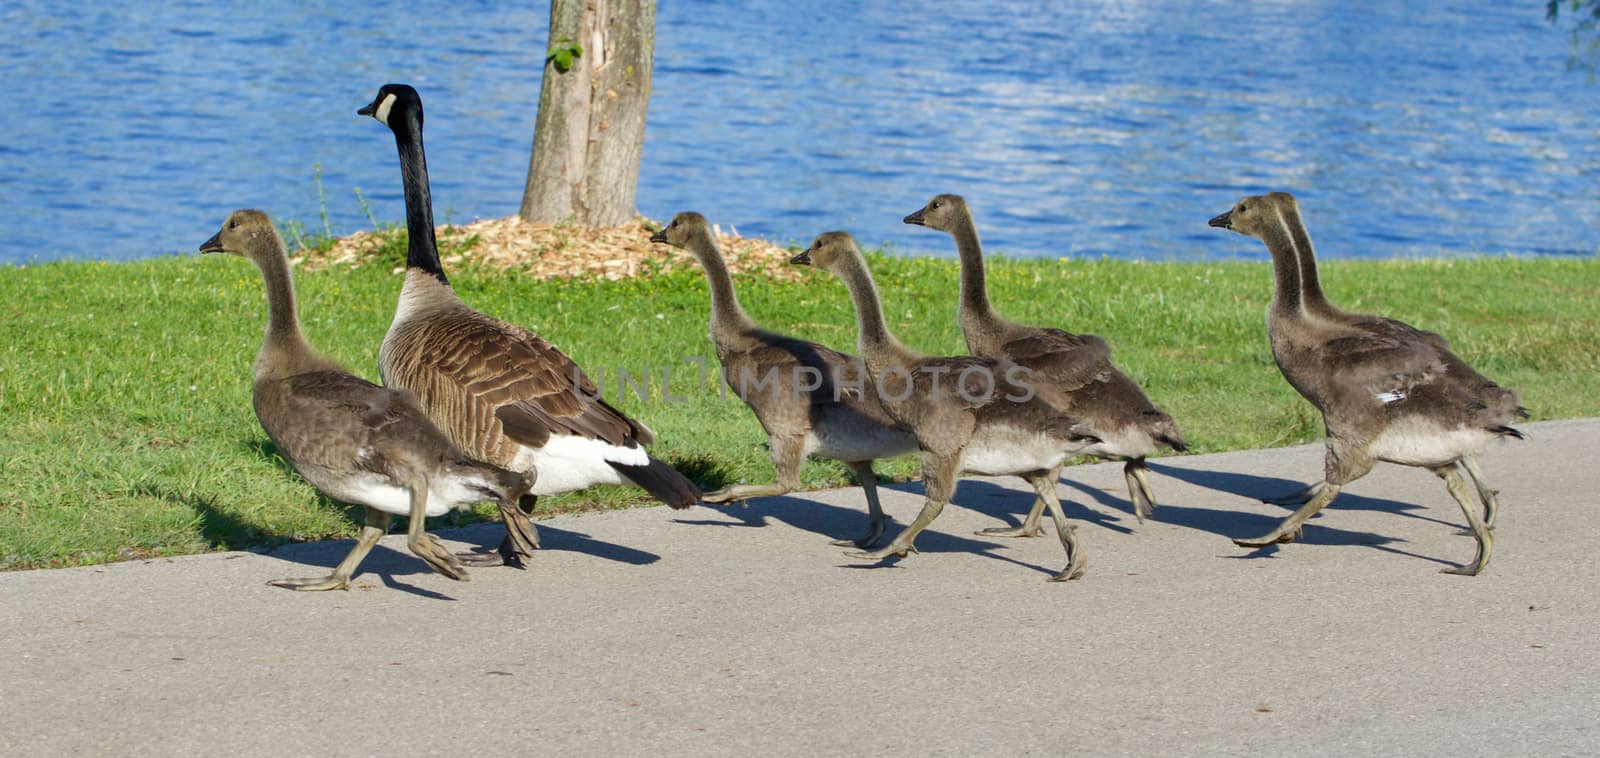 The cackling geese are running by teo